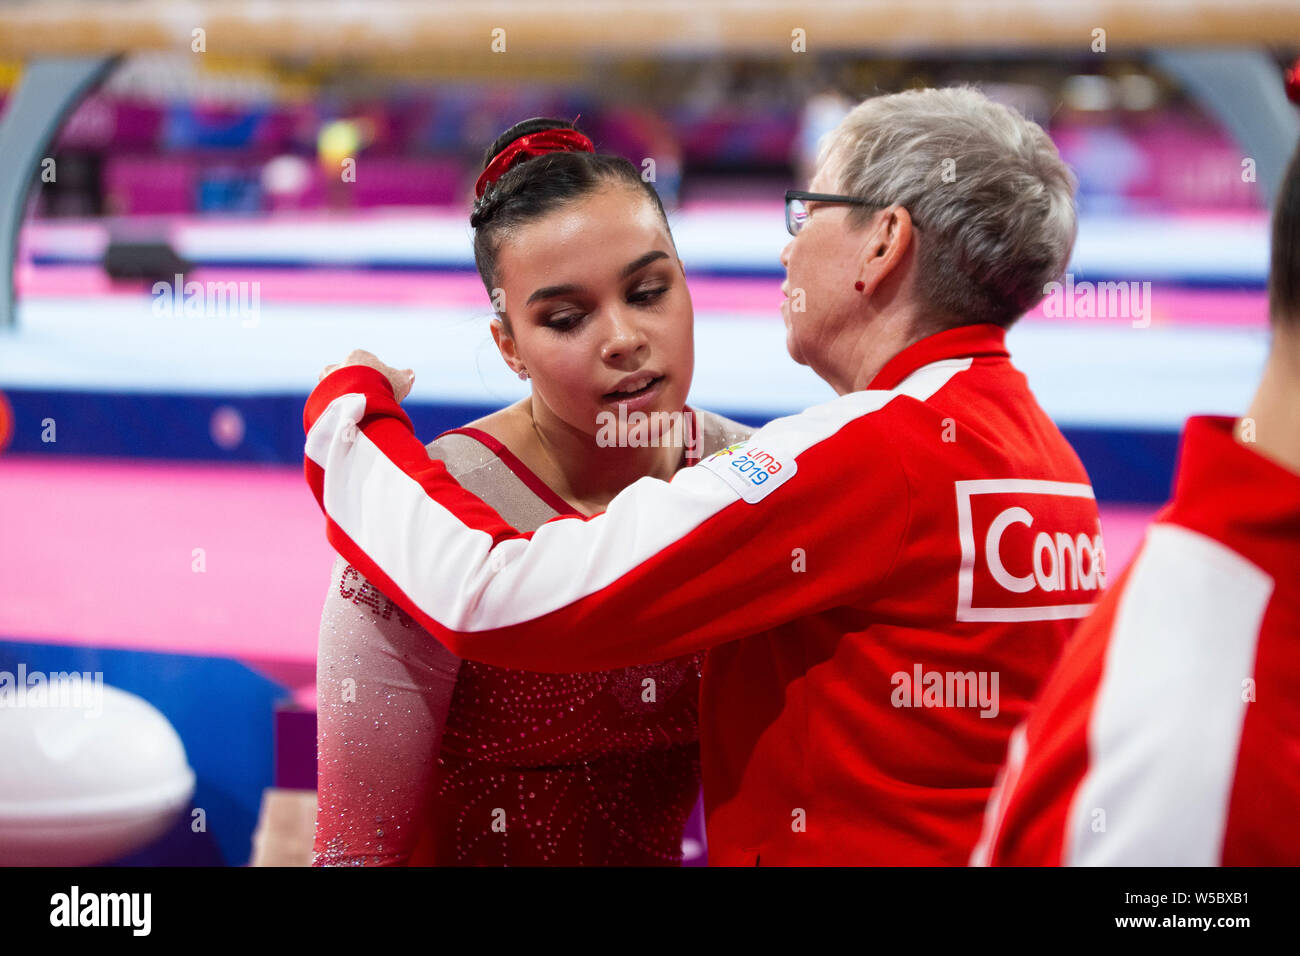 Lima, Peru. 27th July, 2019. Brooklyn Moors (#14) with her Coach during the Pan American Games Women's Artistic Gymnastics, Qualification and Team Final at Polideportivo Villa el Salvador in Lima, Peru. Daniel Lea/CSM/Alamy Live News Stock Photo